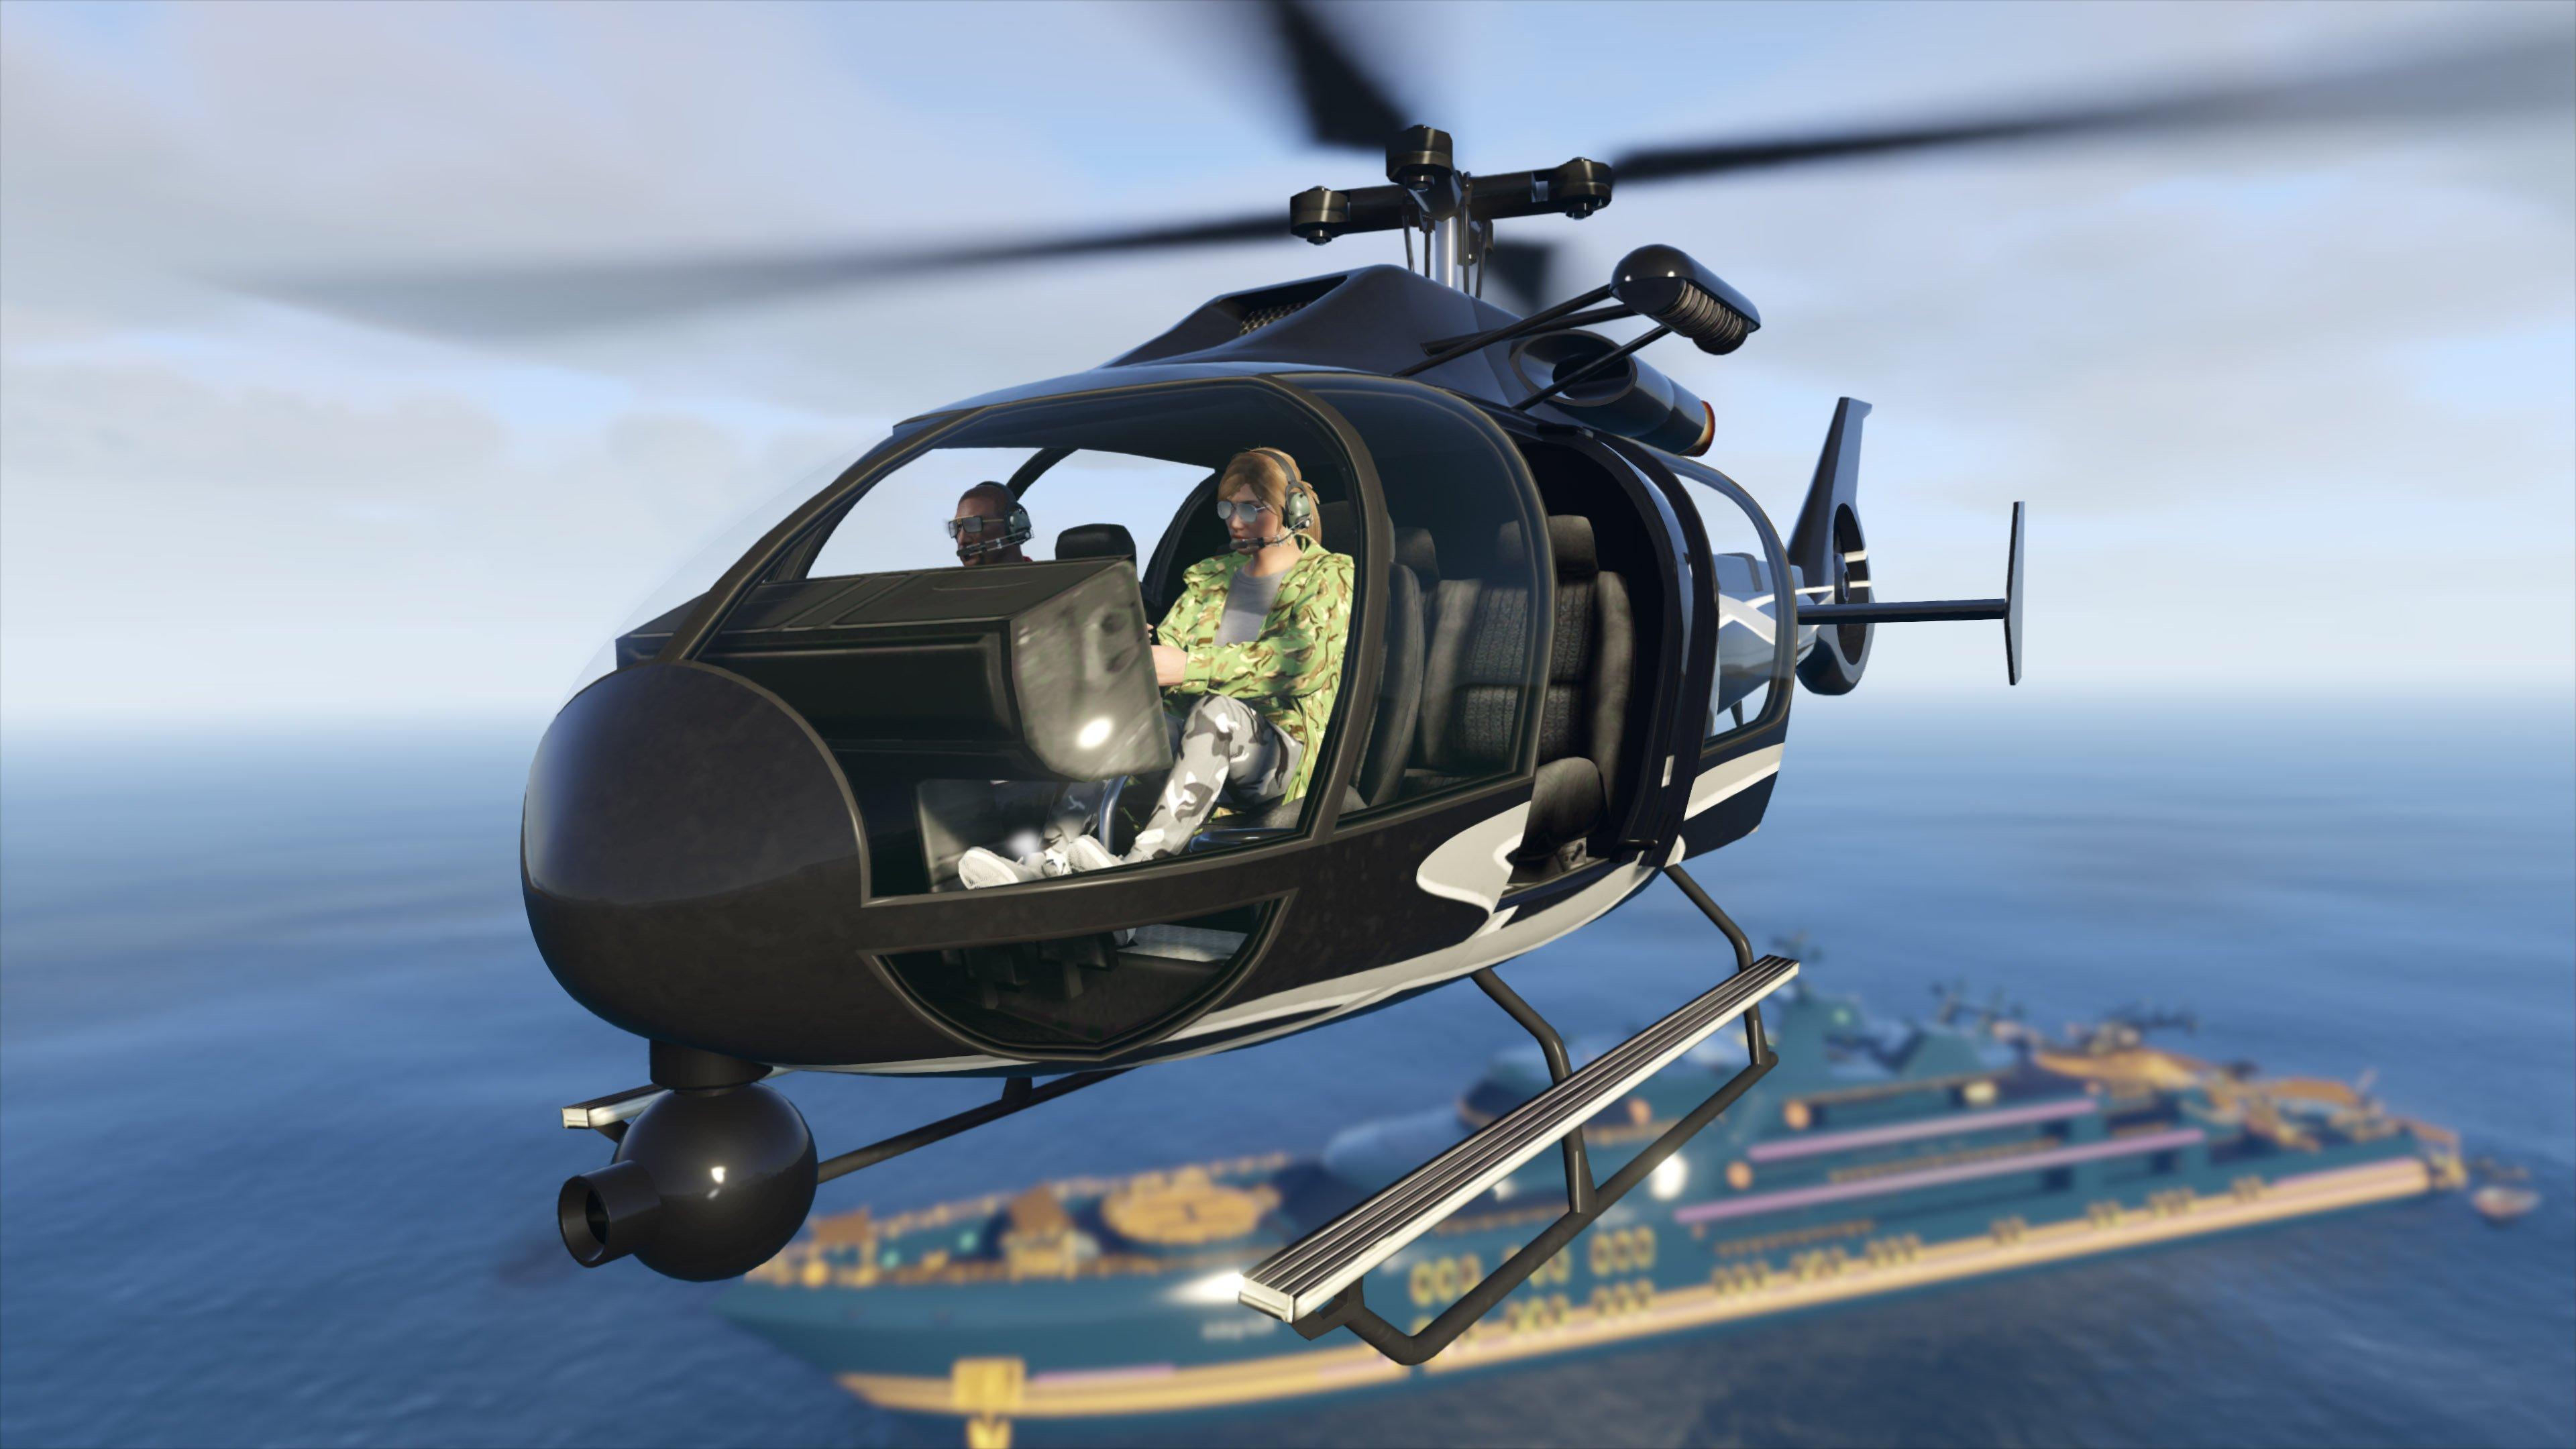 Grand Theft Auto V Cheats For PS3 - Spawn Planes, Helicopters, Cars, Boosts  and More - PlayStation LifeStyle